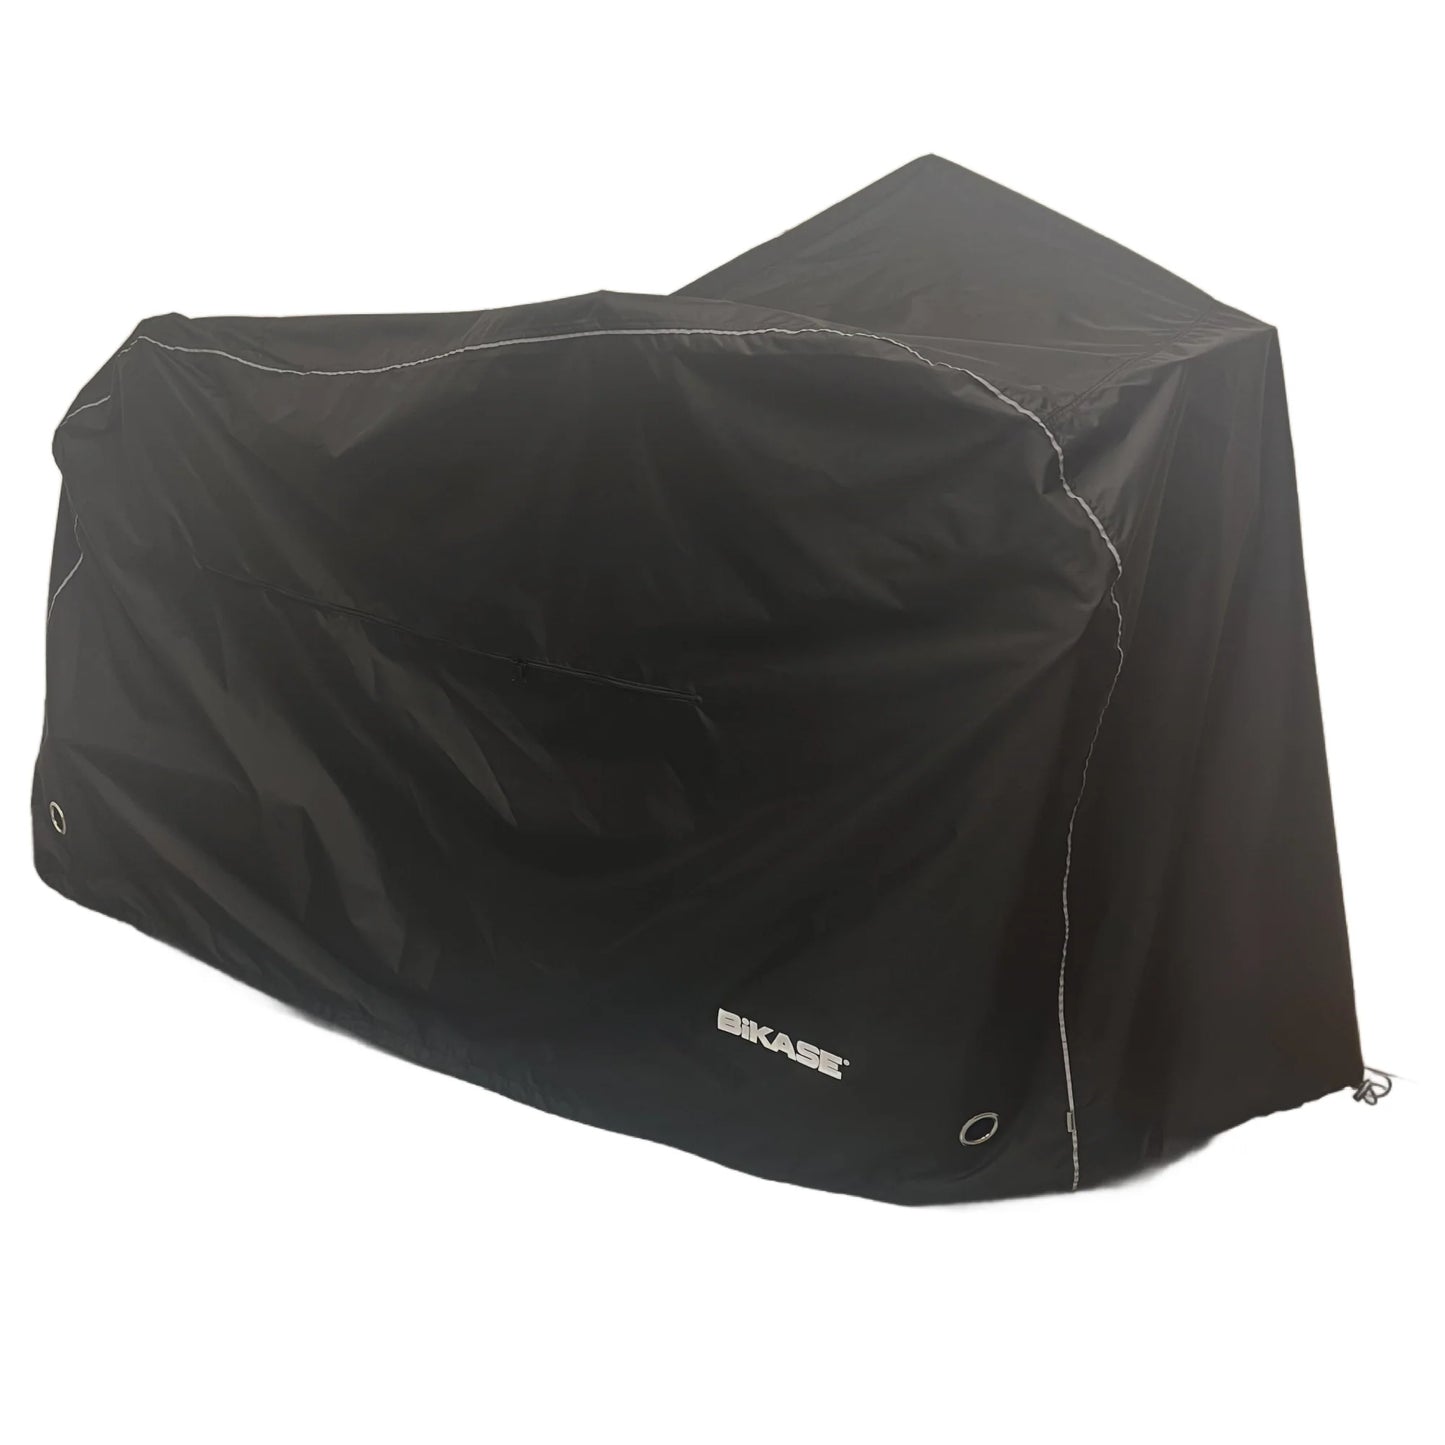 Large Ebike Cover for Two Electric Bikes